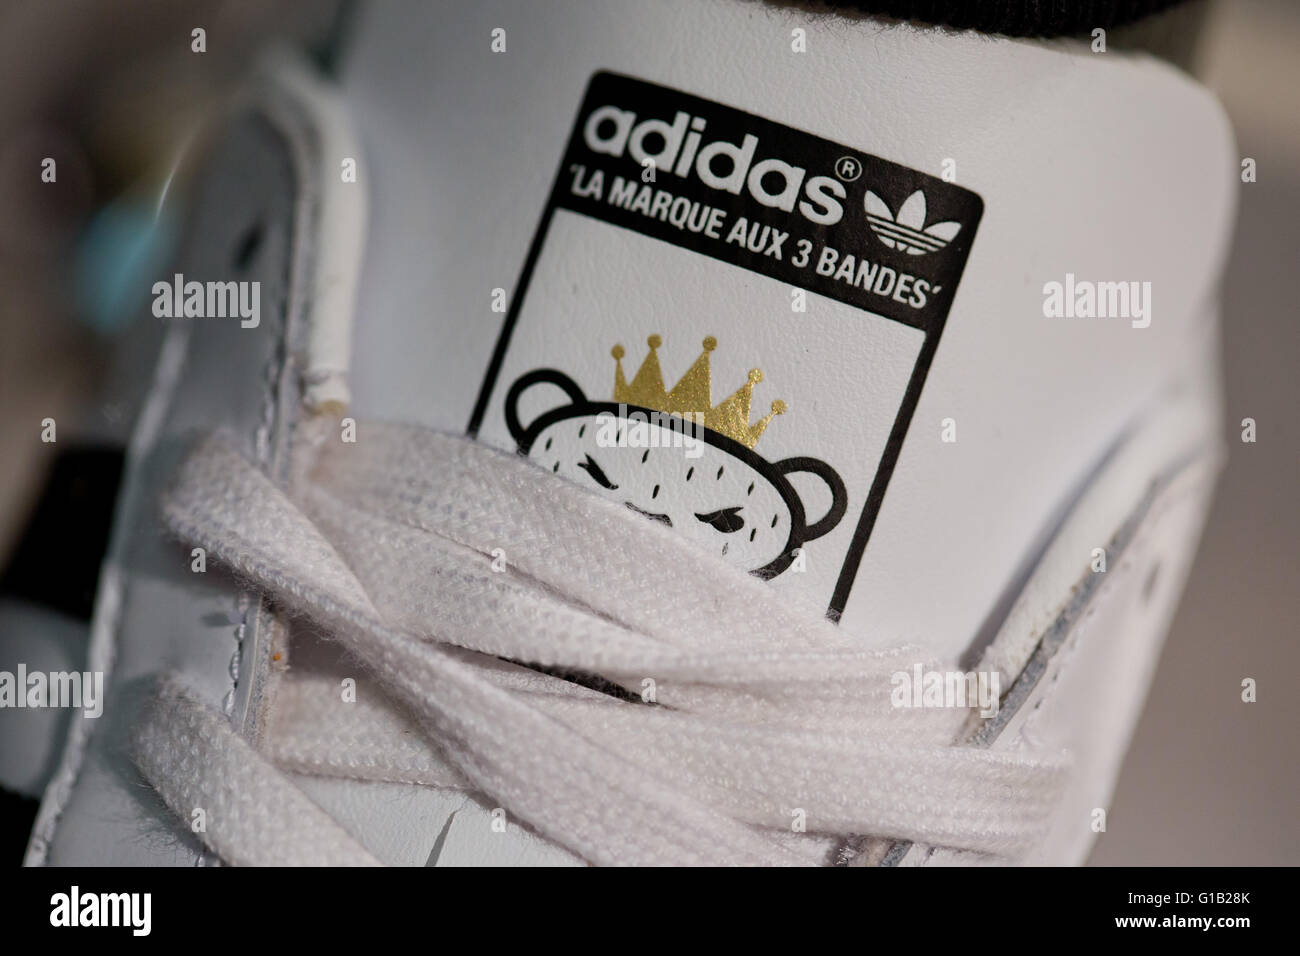 The Brand With The Three Stripes High Resolution Stock Photography and  Images - Alamy